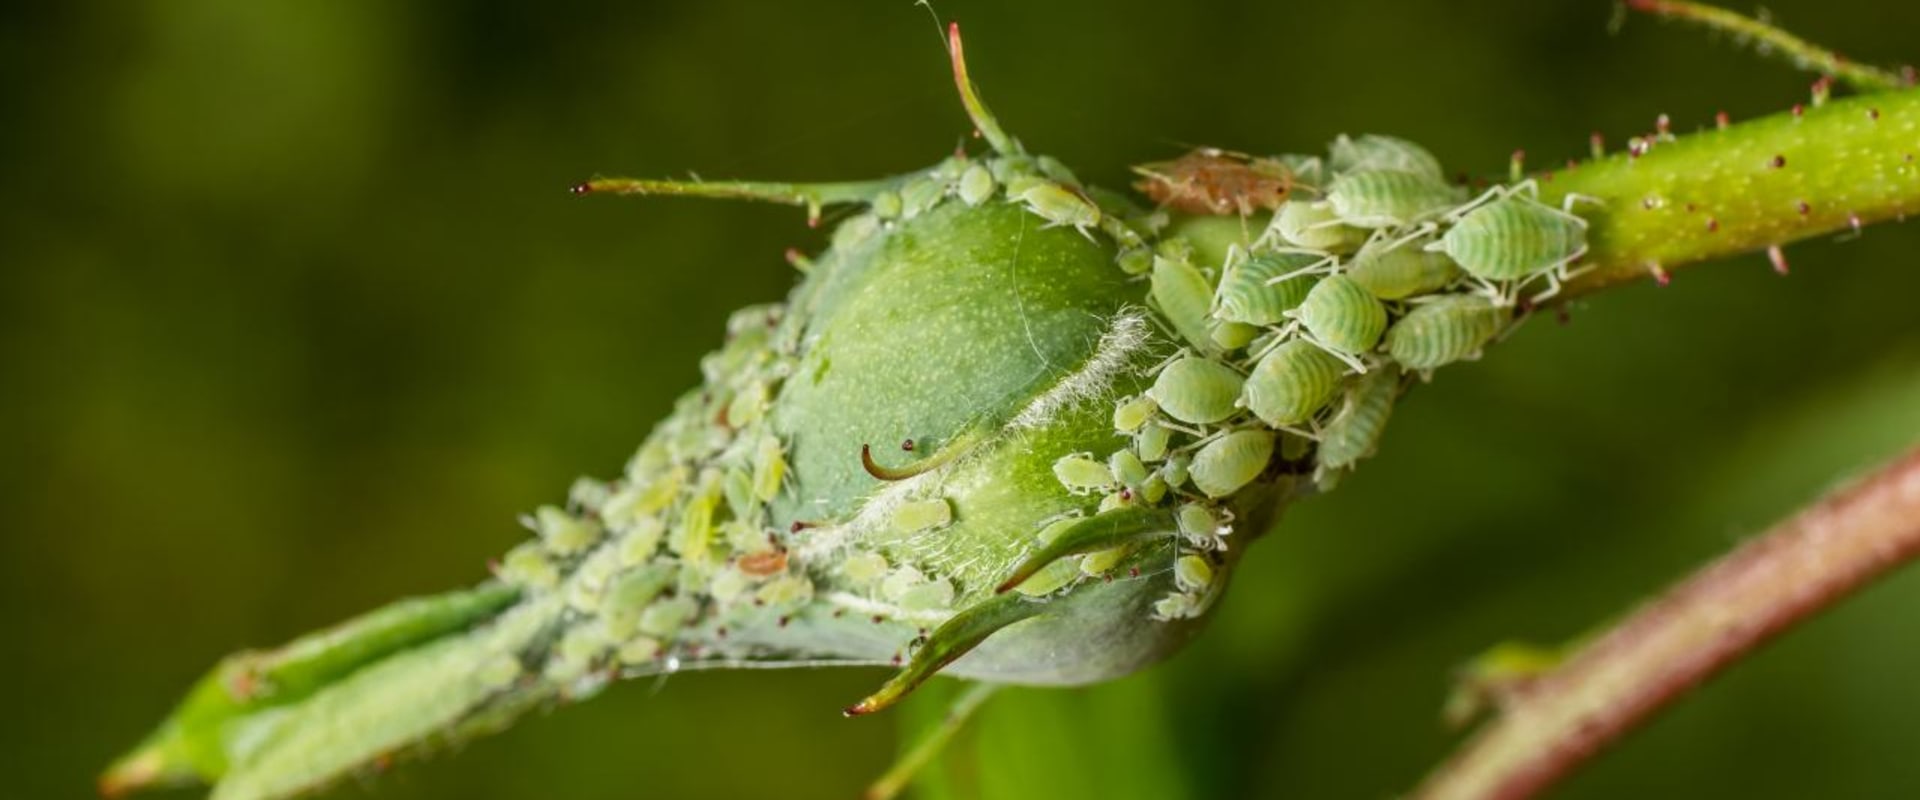 A Comprehensive Look at Aphids and Whiteflies